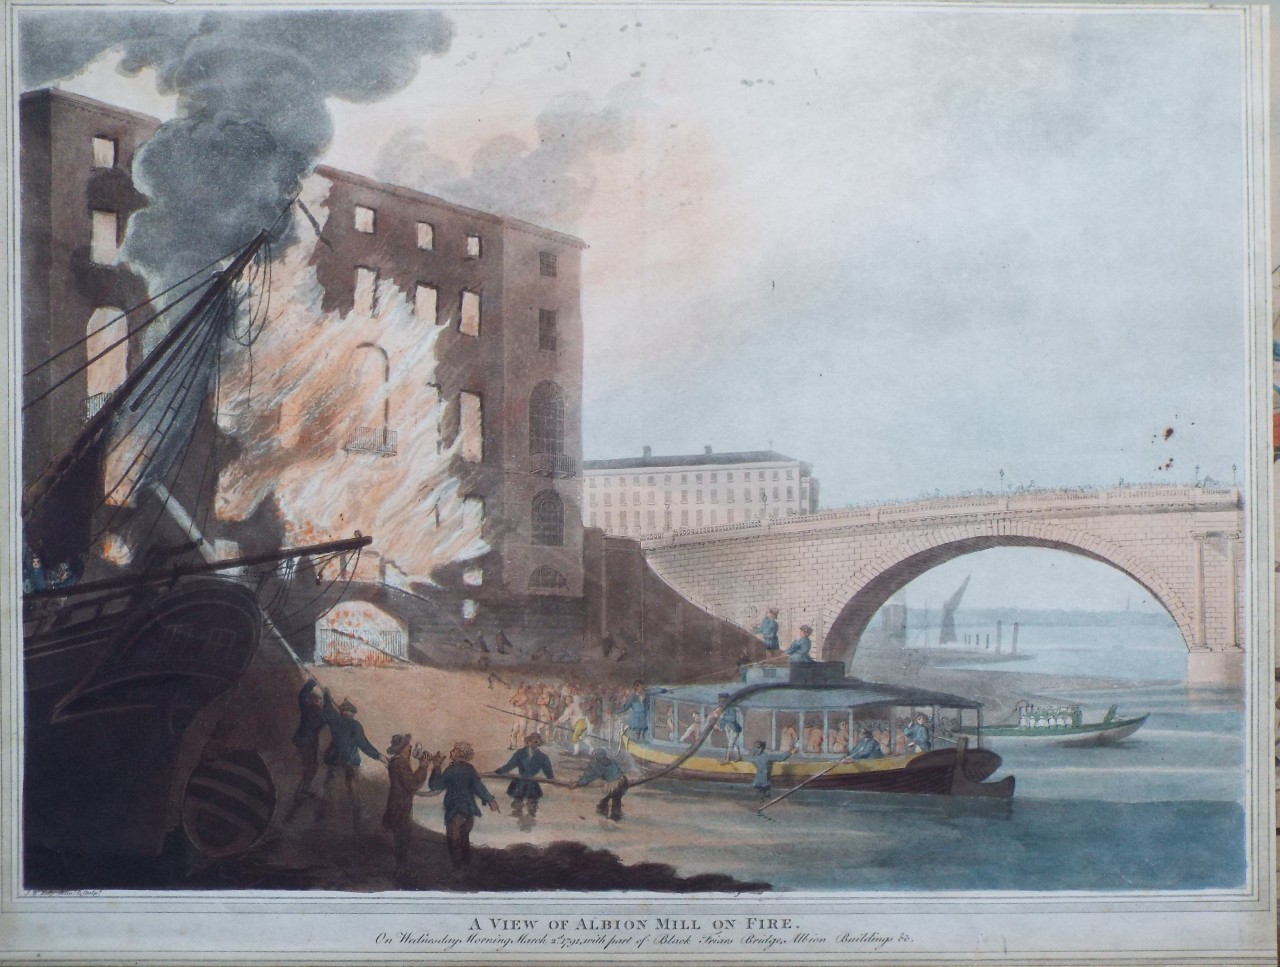 Aquatint - A View of Albion Mill on Fire. On Wednesday Morning, March 2d. 1791, with part of Black Friars Bridge, Albion Buildings, &c. - Edy